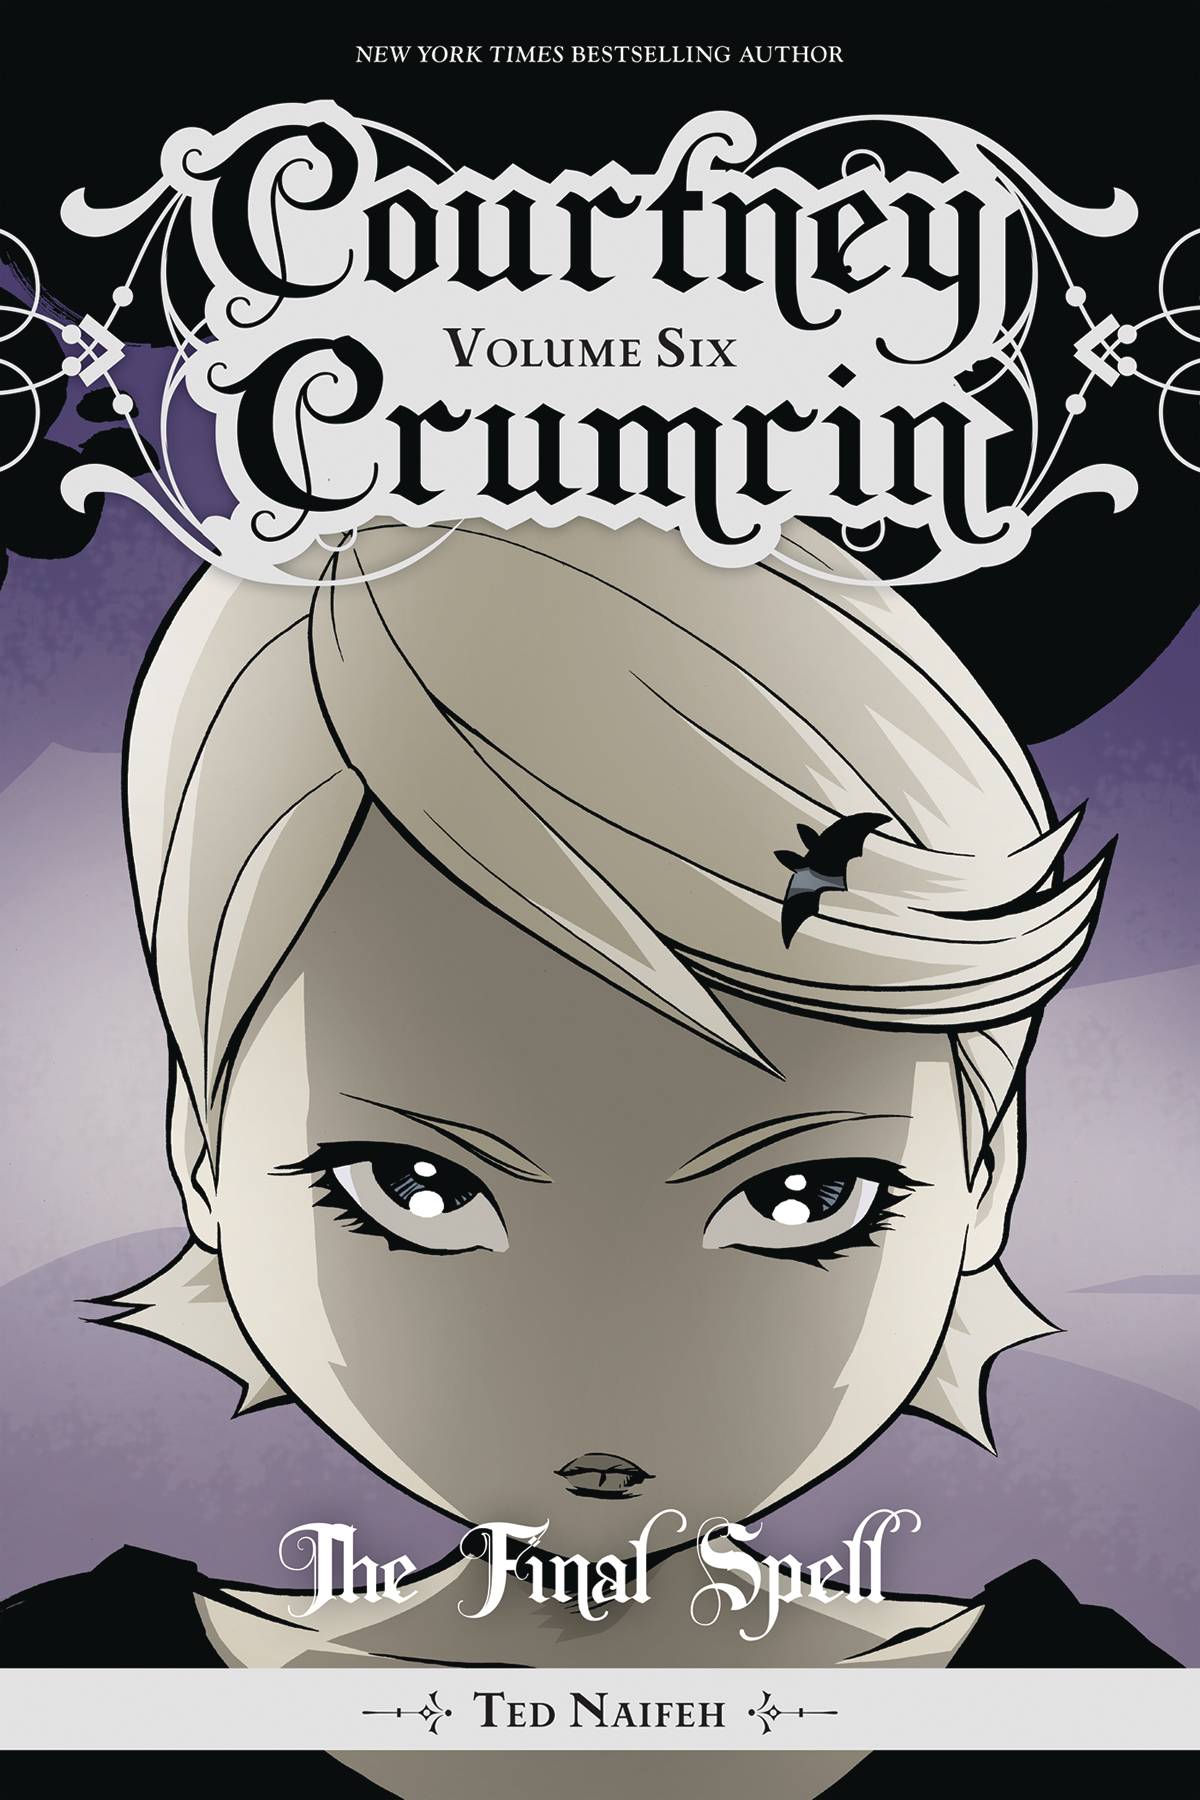 Courtney Crumrin Graphic Novel Volume 6 The Final Spell